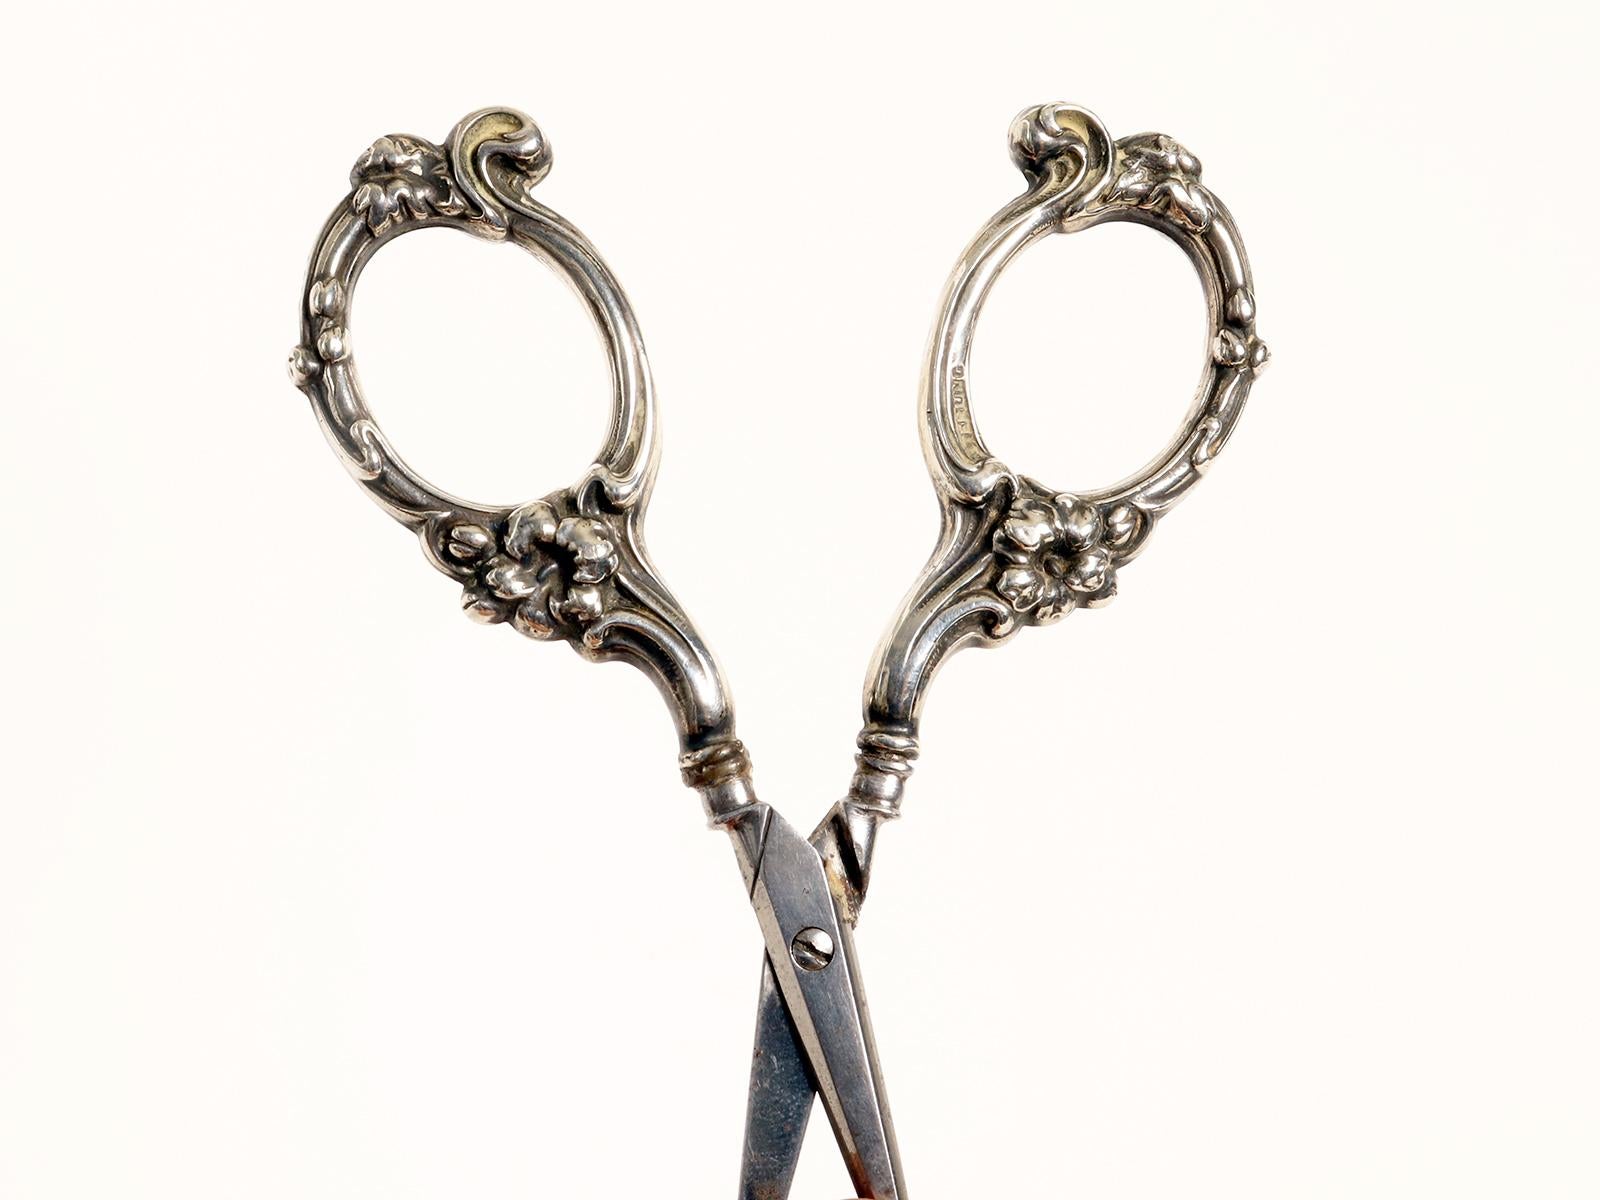 American Sterling Silver Scissors to Cut the Stems of the Bunches of Grapes, USA, 1900 For Sale